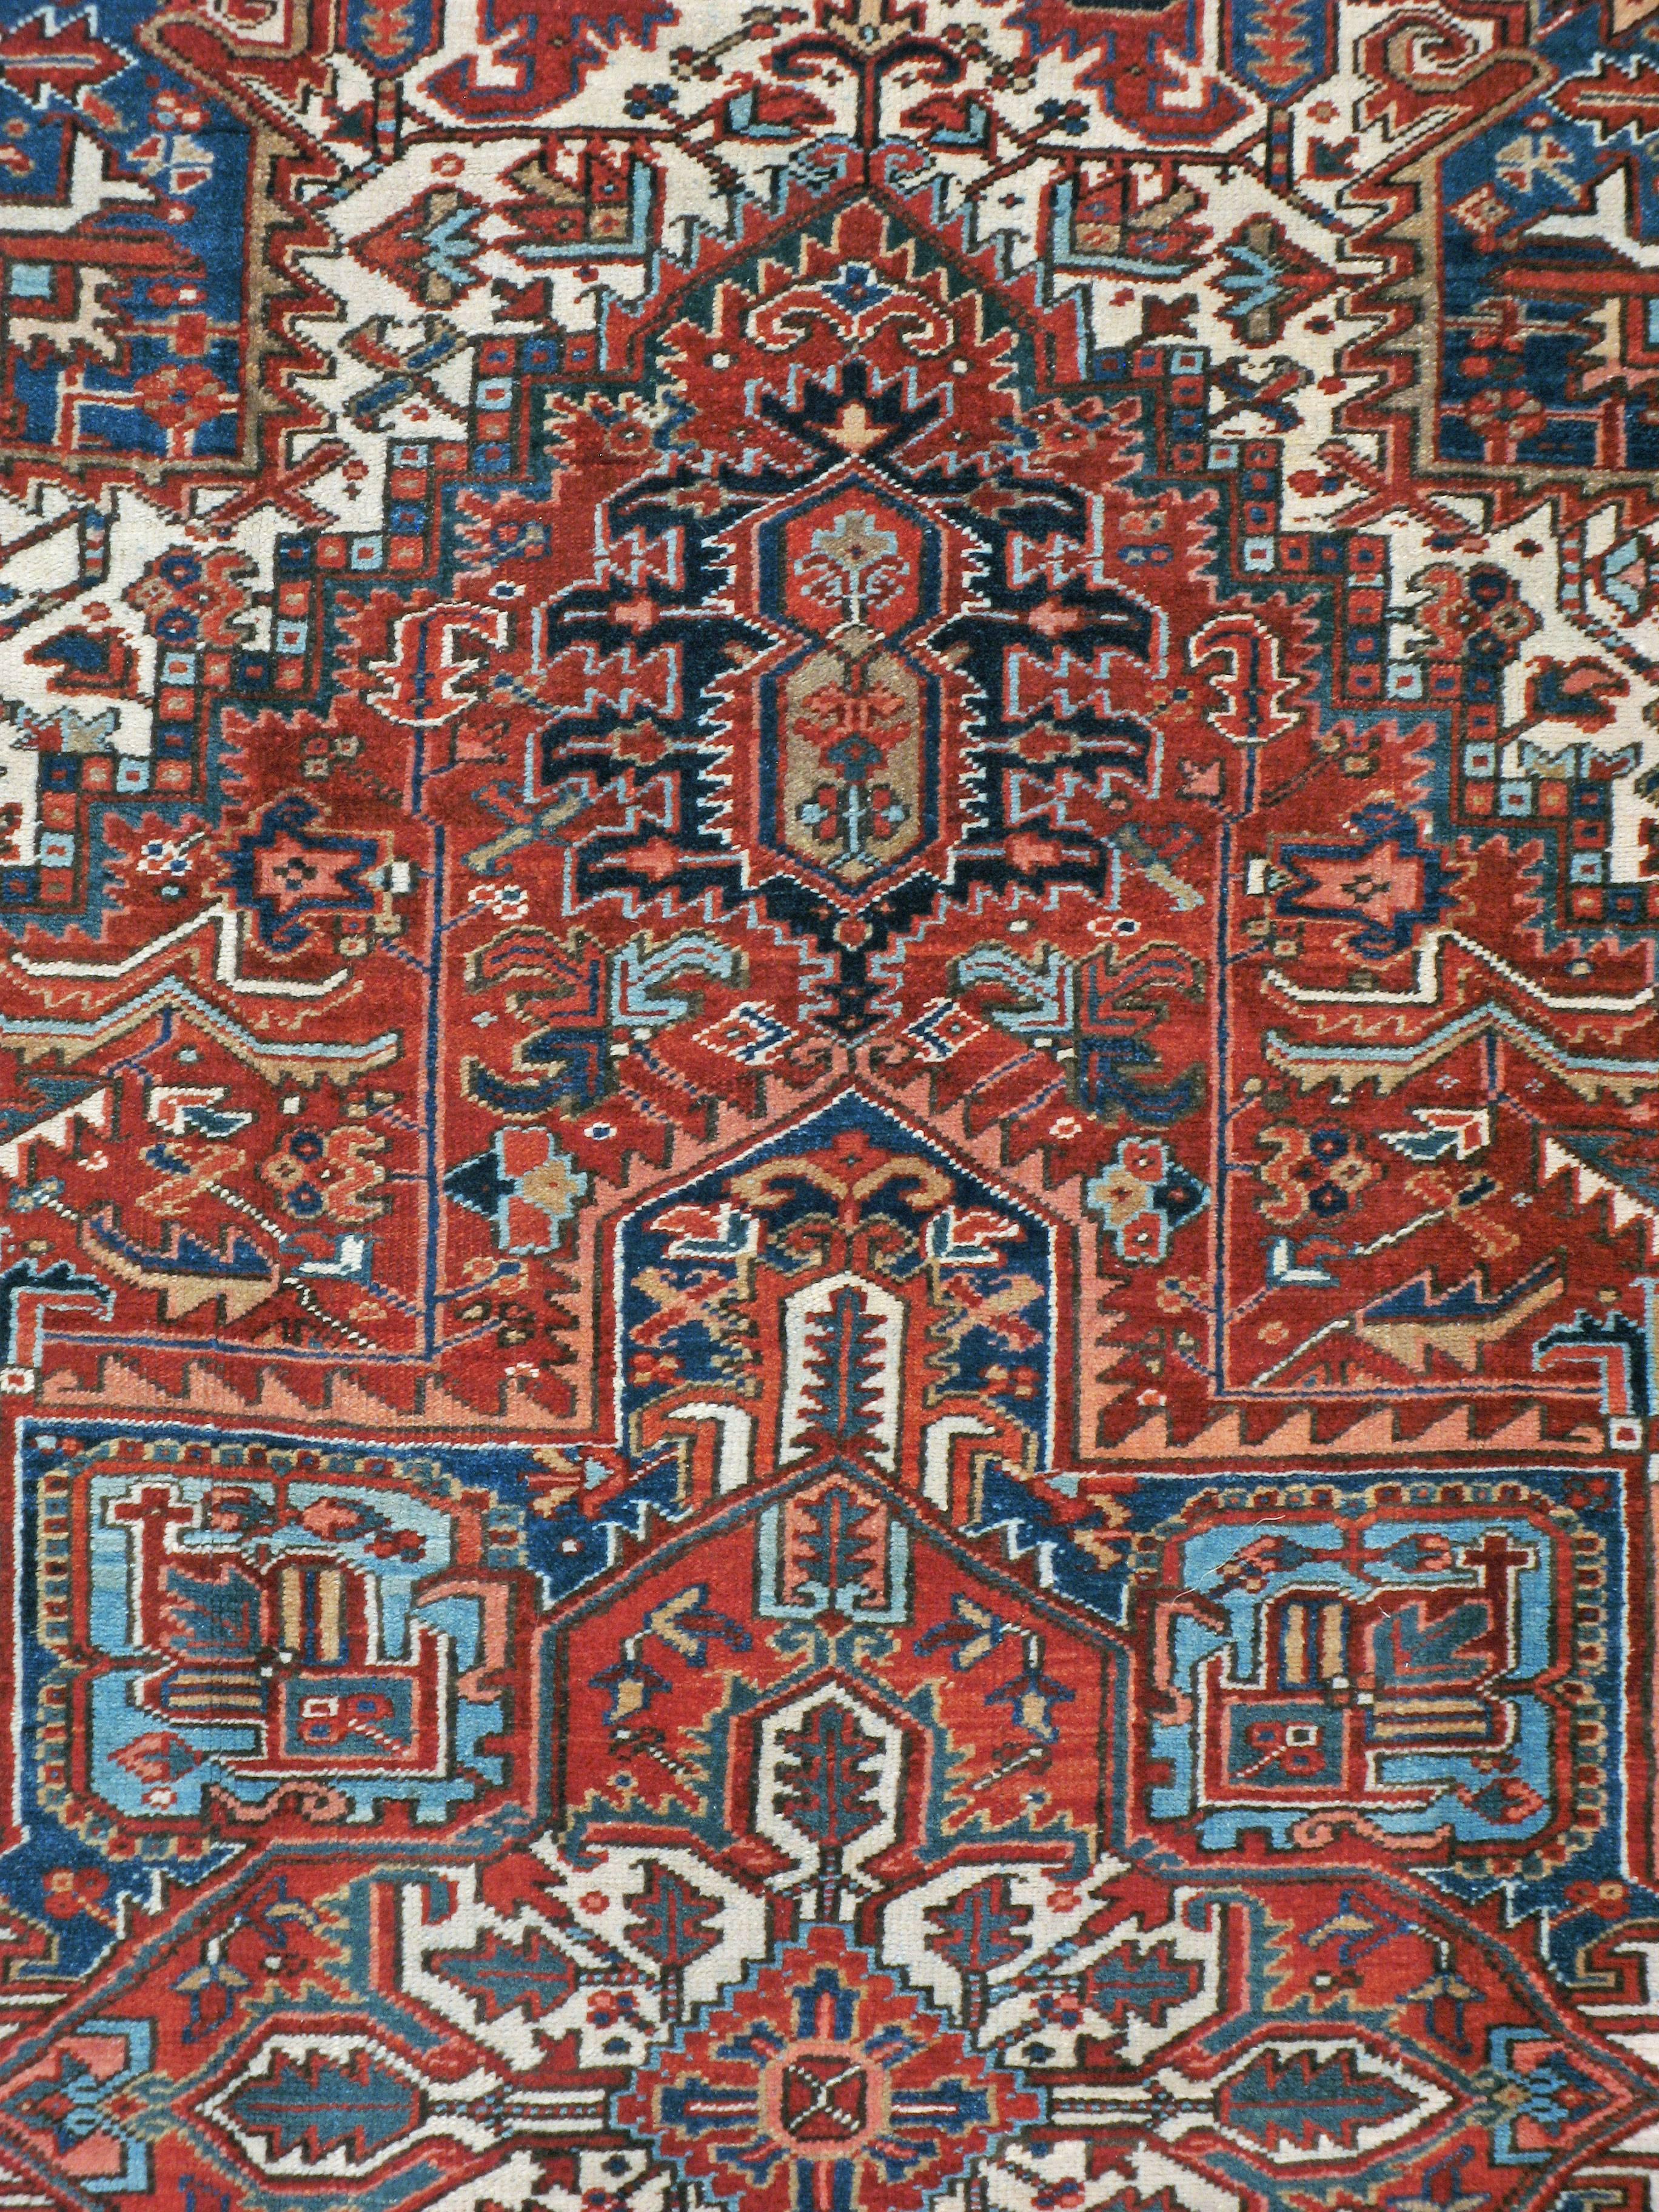 A vintage Persian Heriz rug from the mid-20th century.